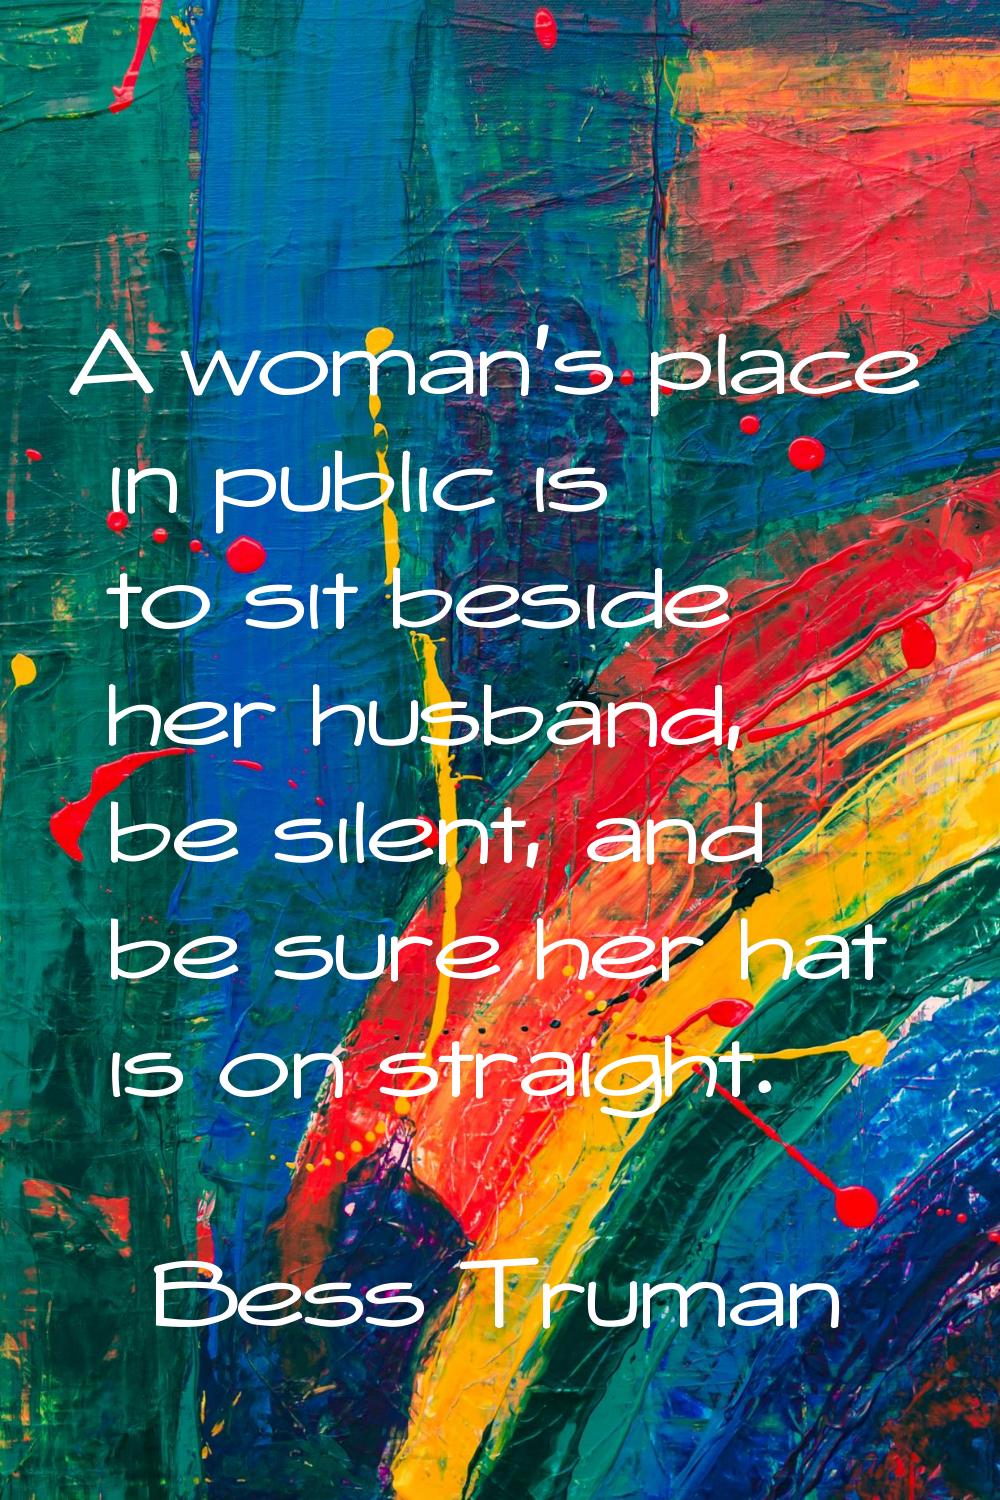 A woman's place in public is to sit beside her husband, be silent, and be sure her hat is on straig